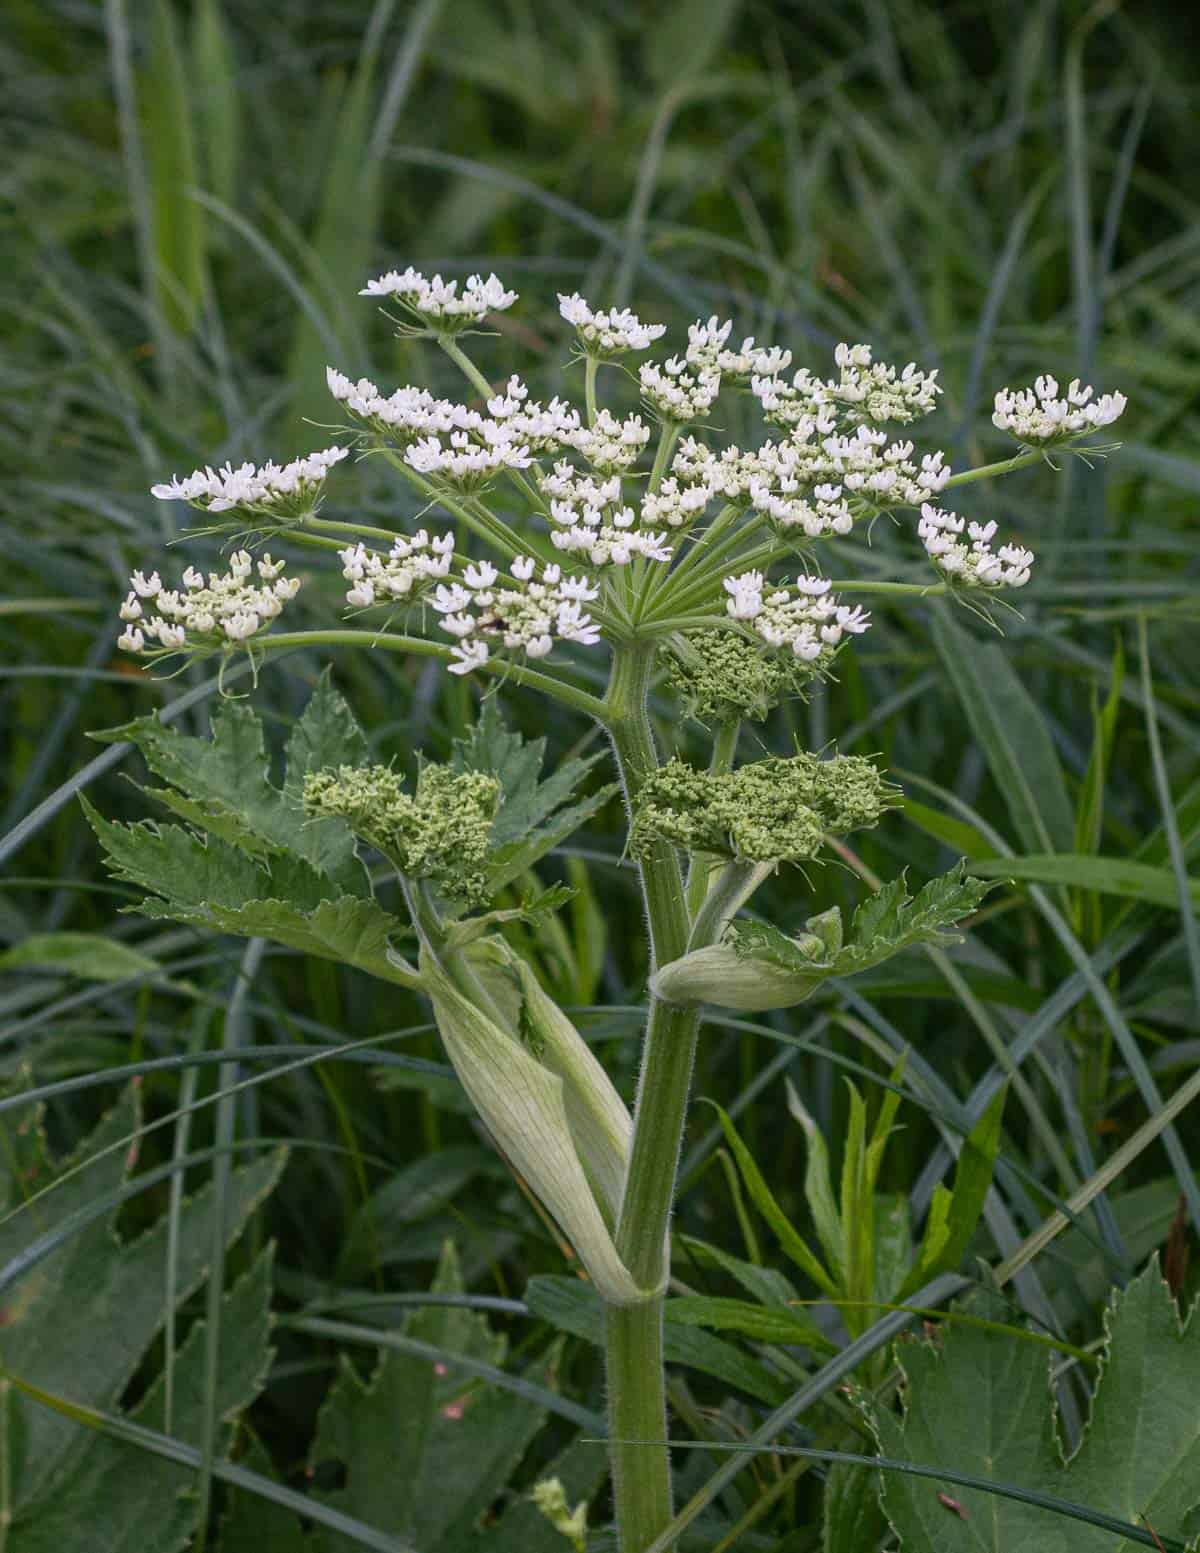 White cow parsnip flowers growing on the plant. 